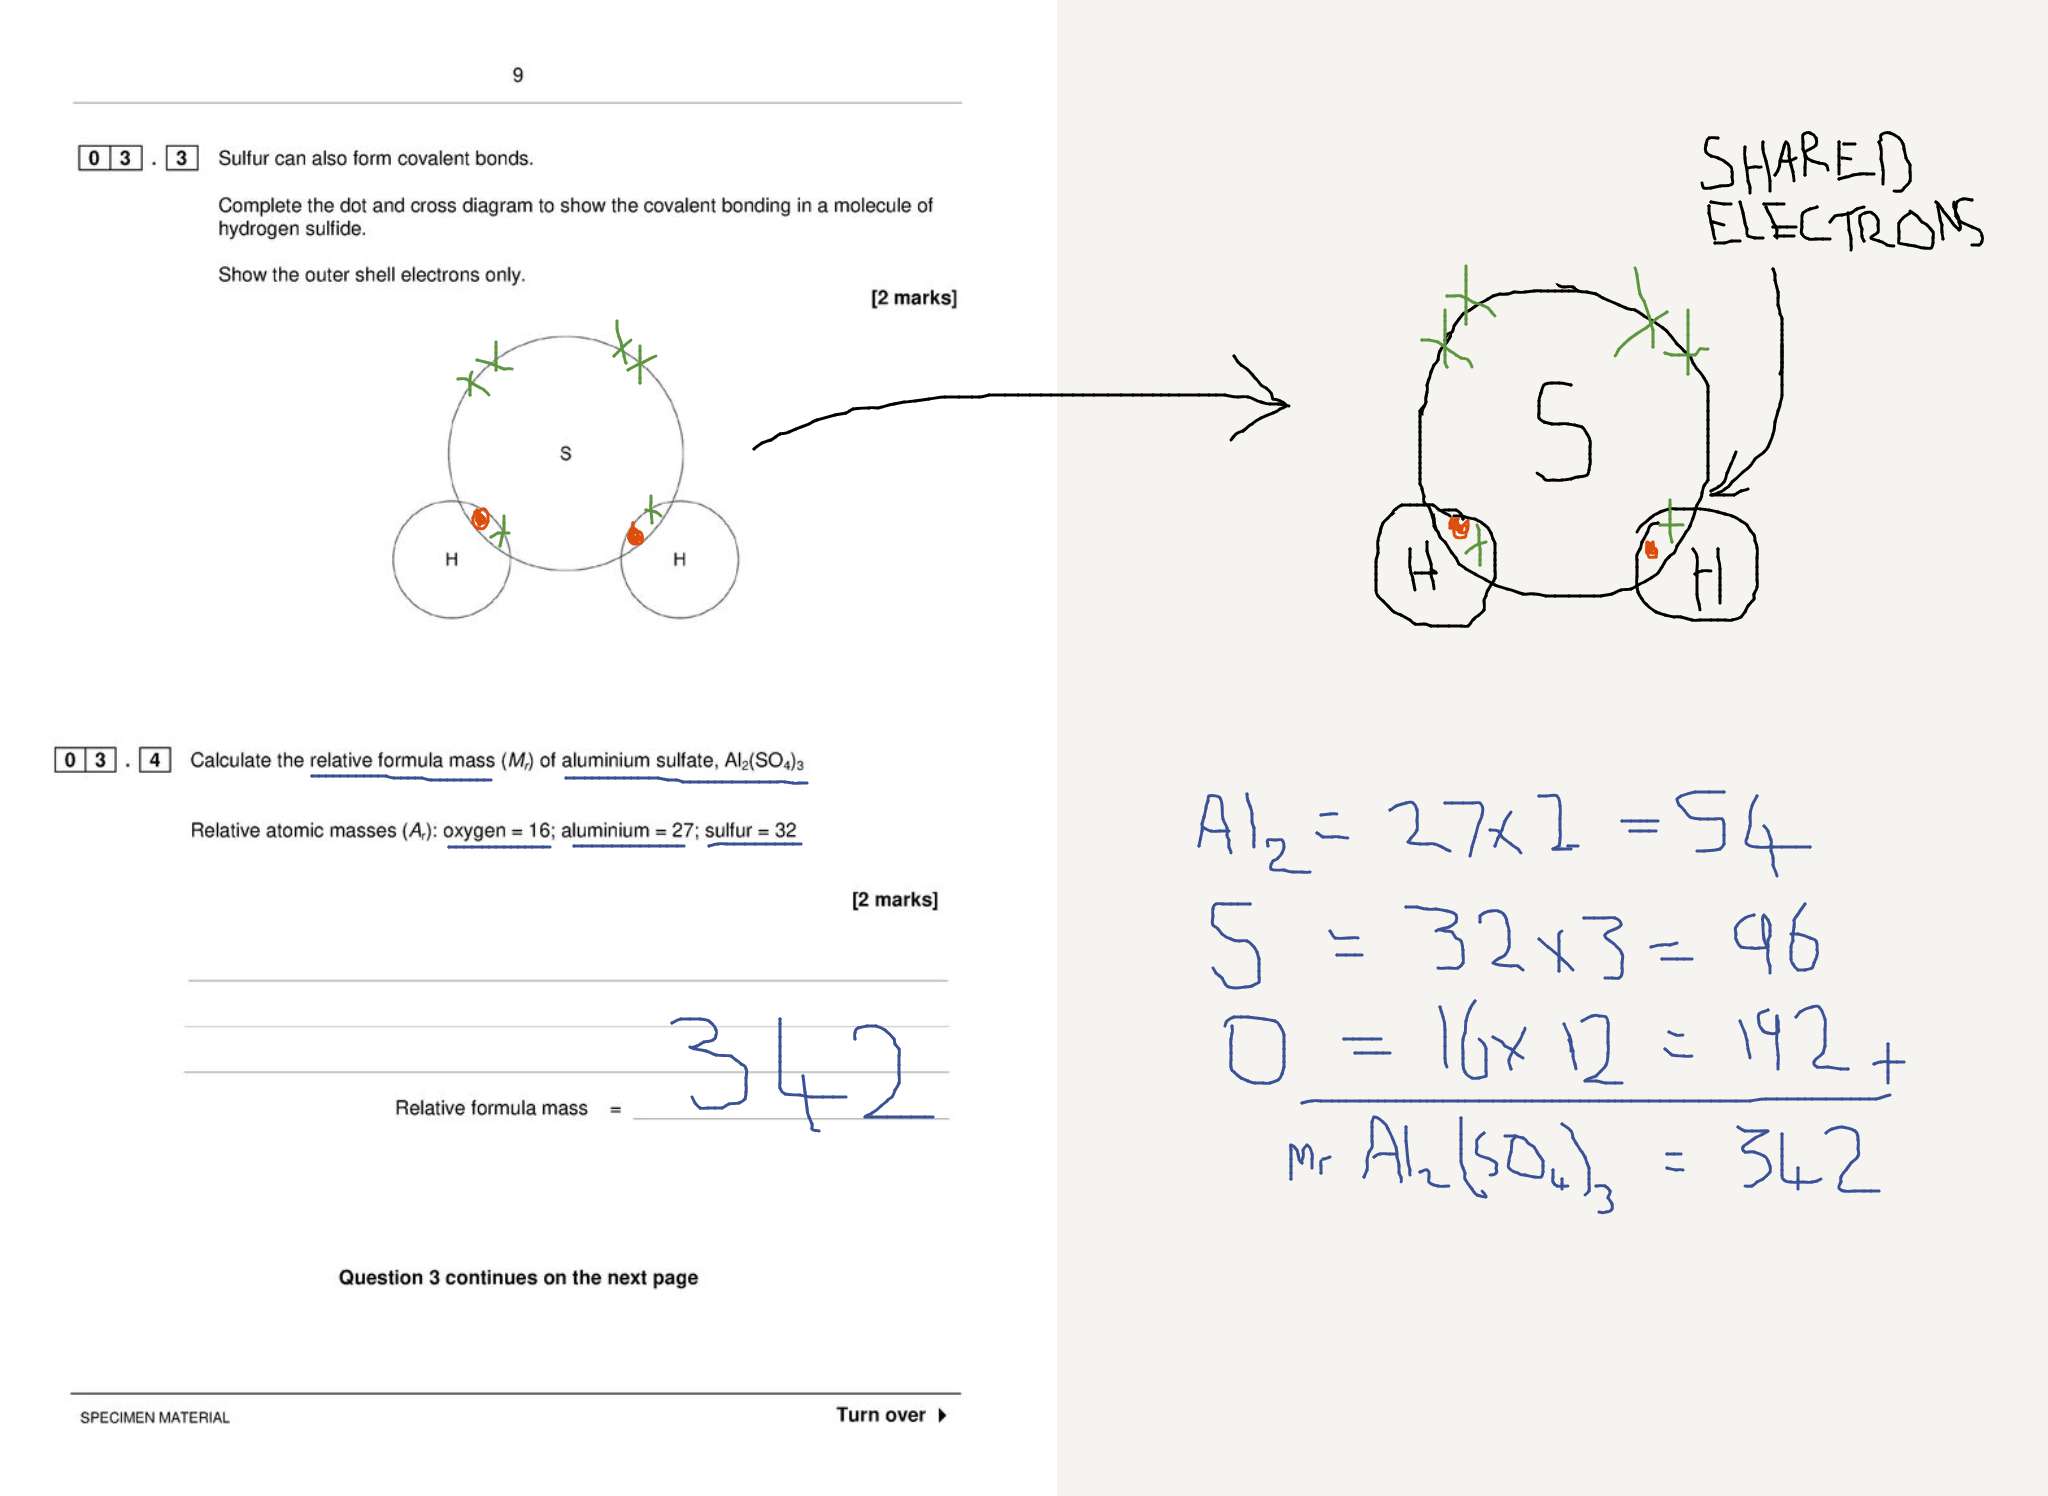 picture of a written exam answer drawn in Bramble using a computer mouse